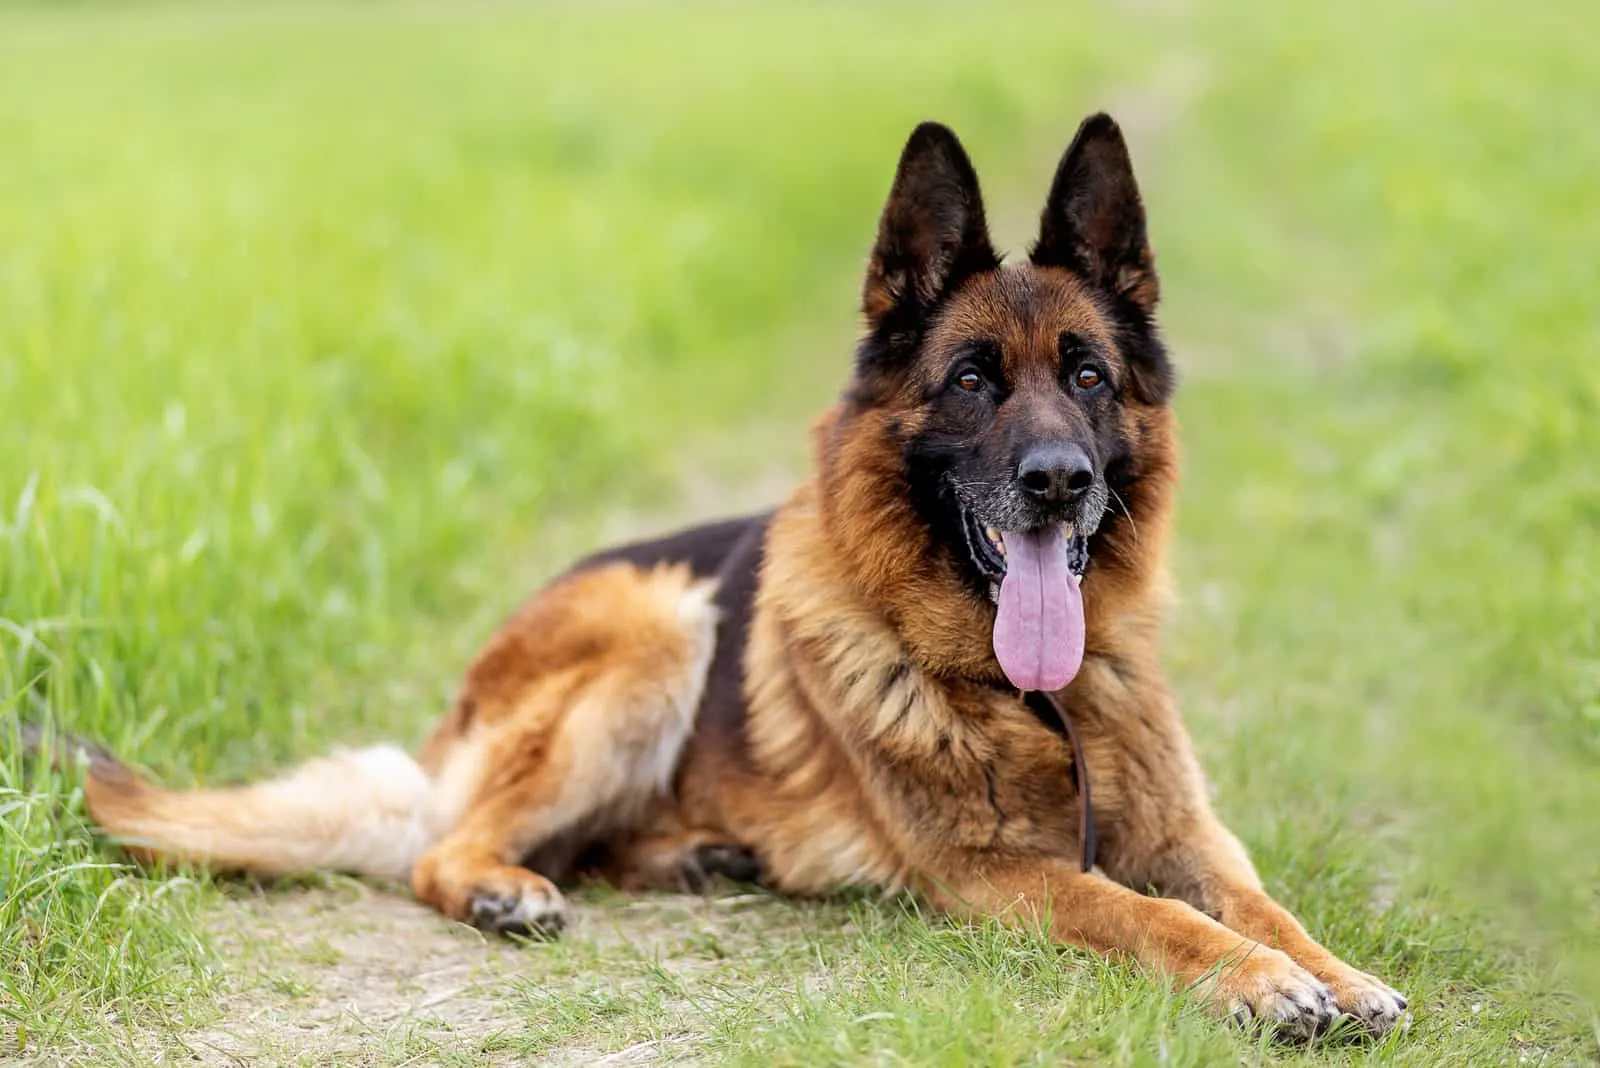 German shepherd with intelligent eyes and protruding tongue